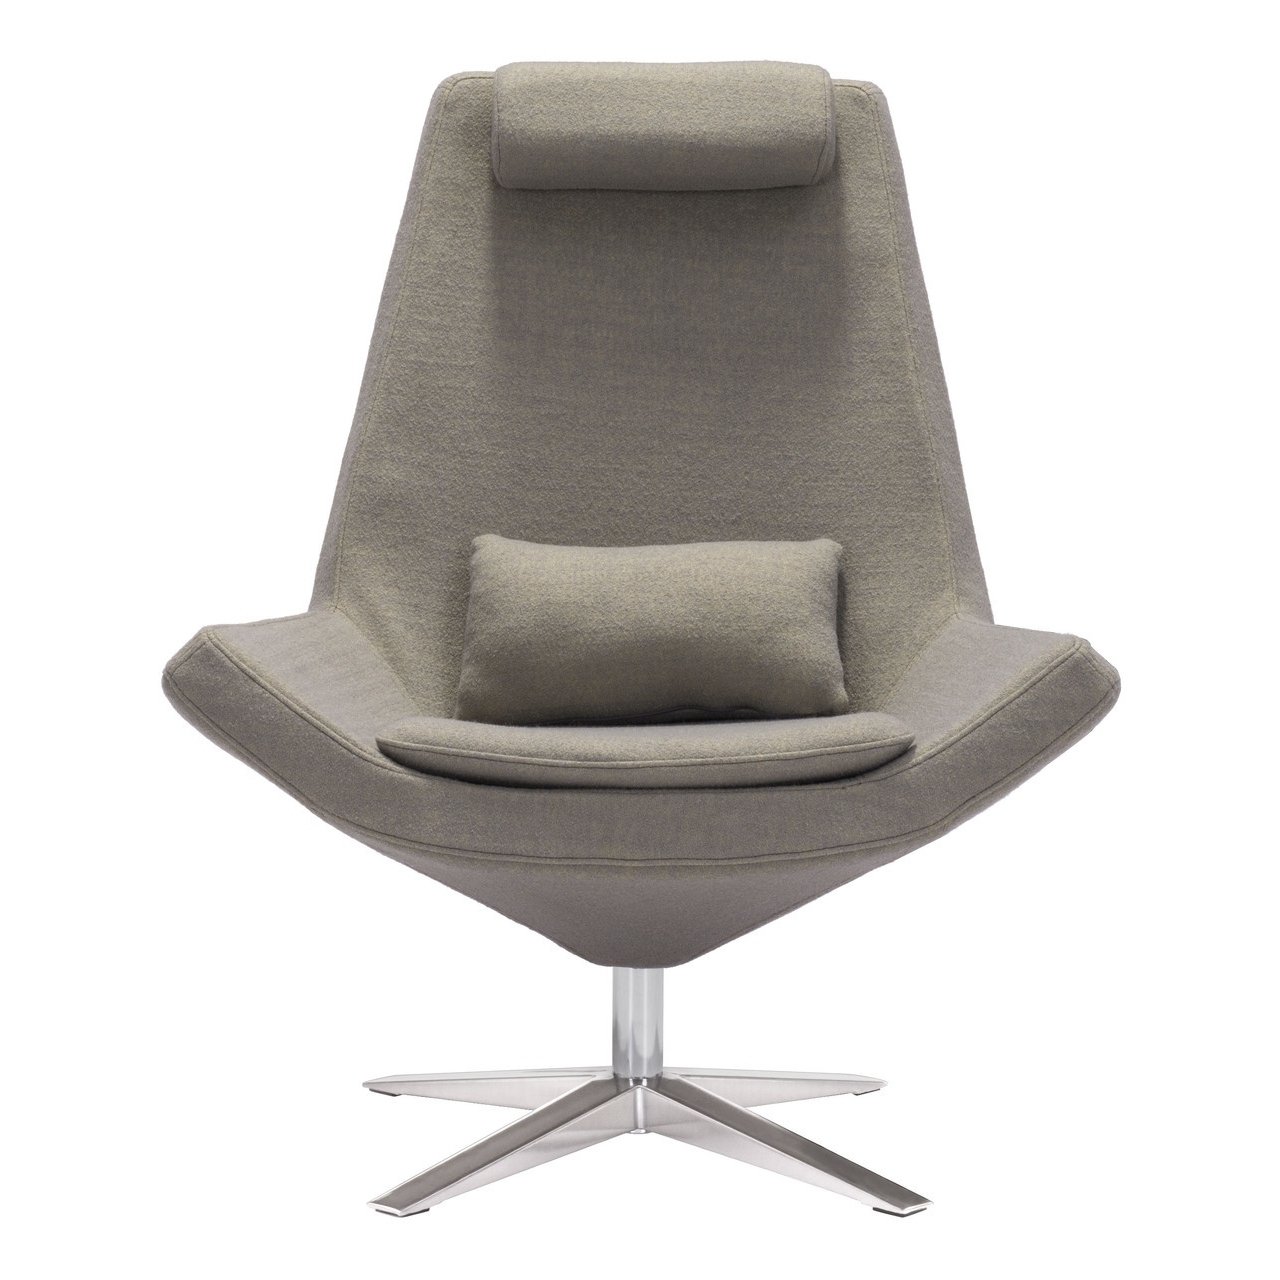 bruges occasional chair - olive green